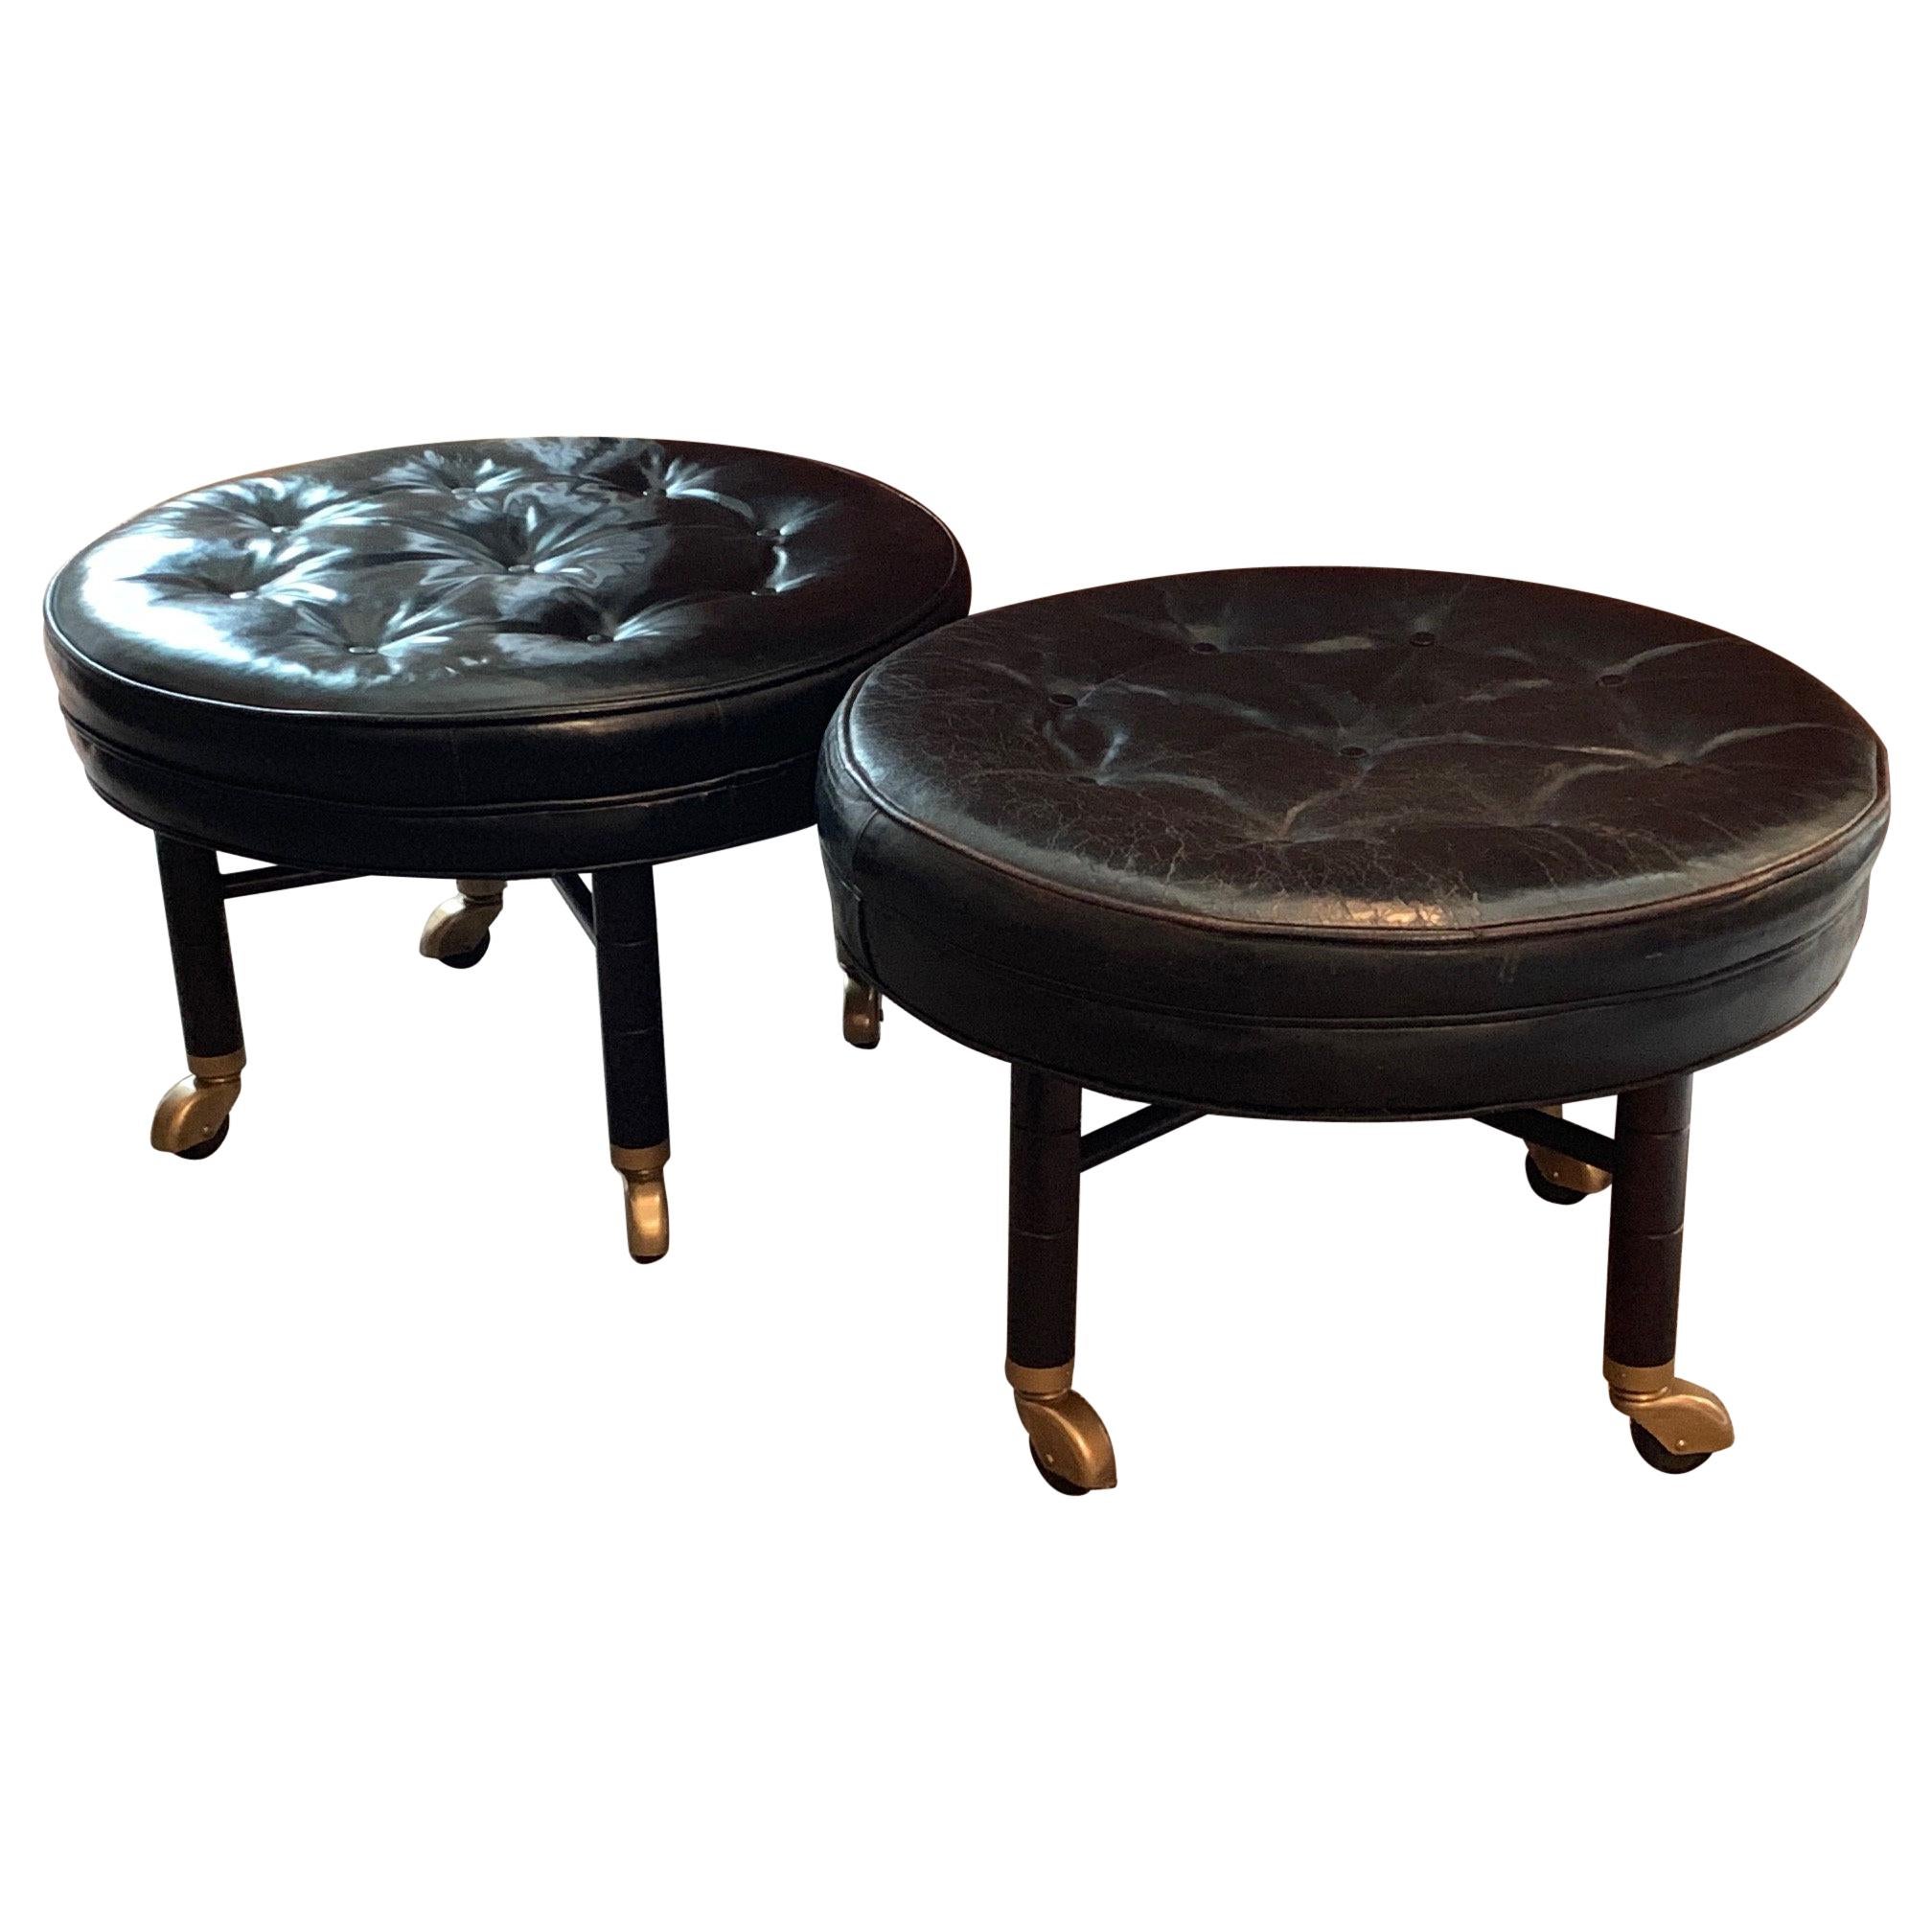 A Pair of Large Round Leather Ottomans by Baker